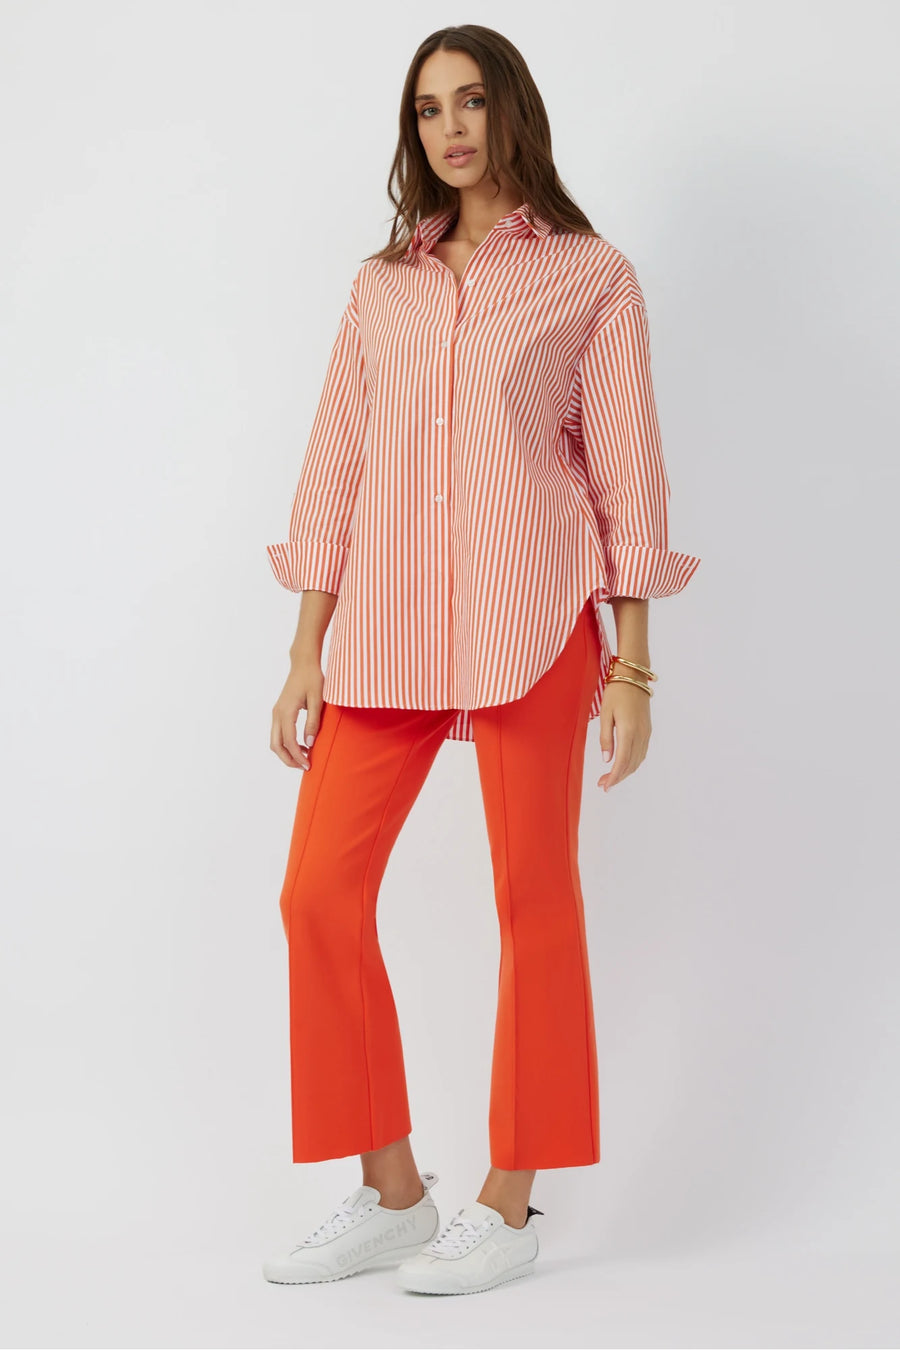 The Reya button down shirt in bengal orange by Greyven